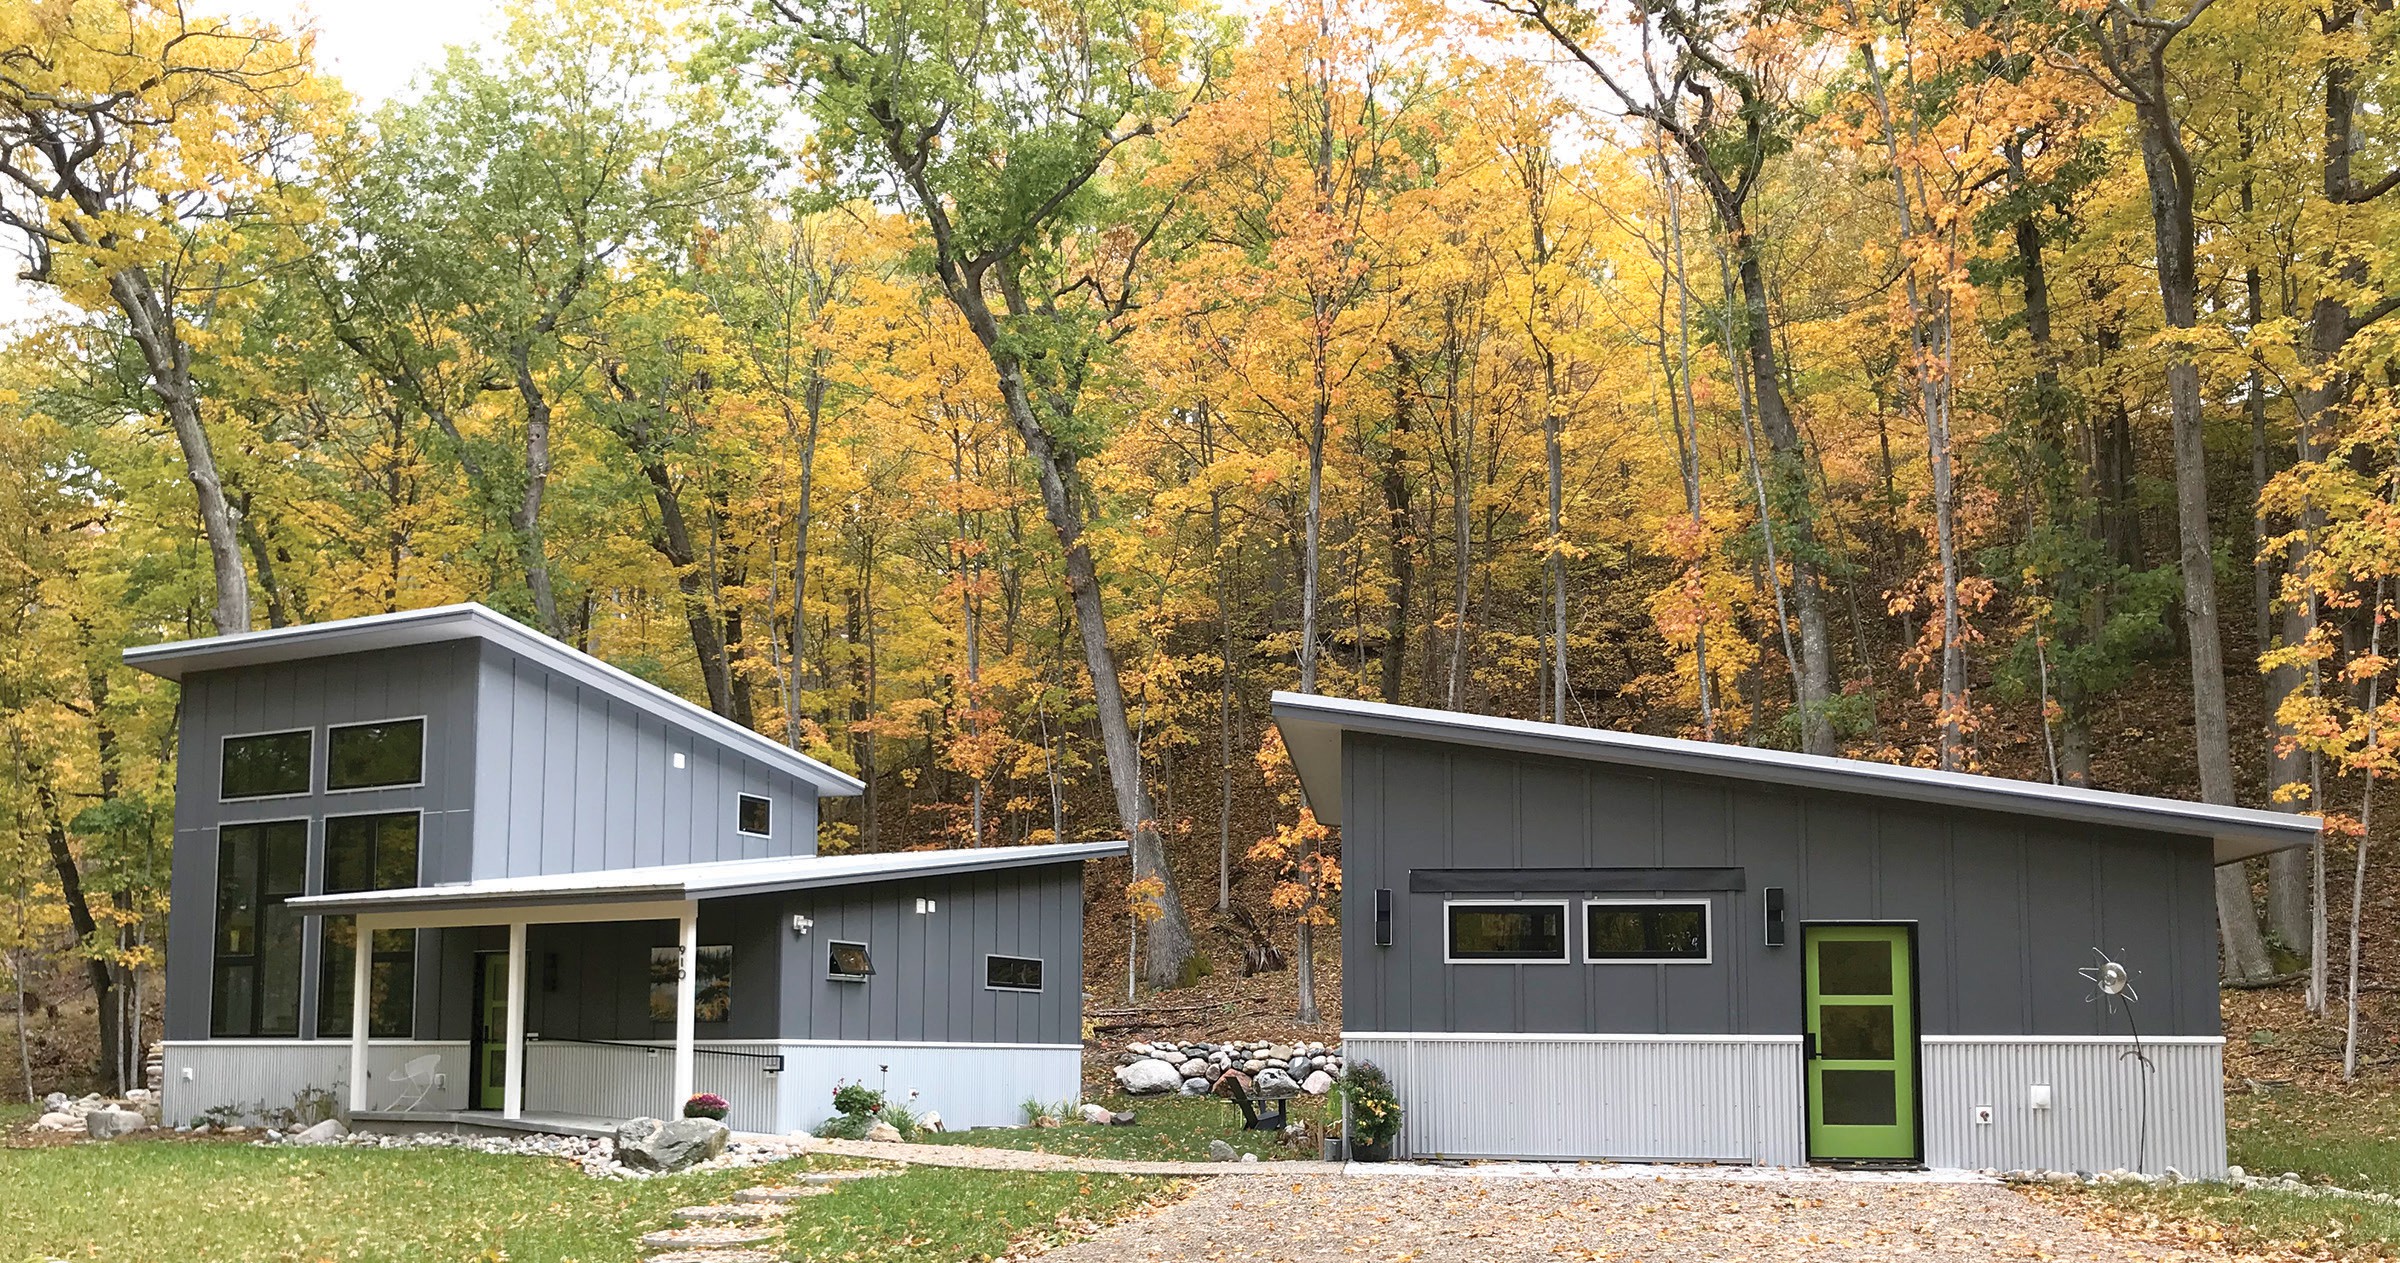 Good Hart Artist Residency offers free room, board, and stipend for writers, composers, and visual artists in the natural surroundings of Michigan. Deadlines to apply: January 11